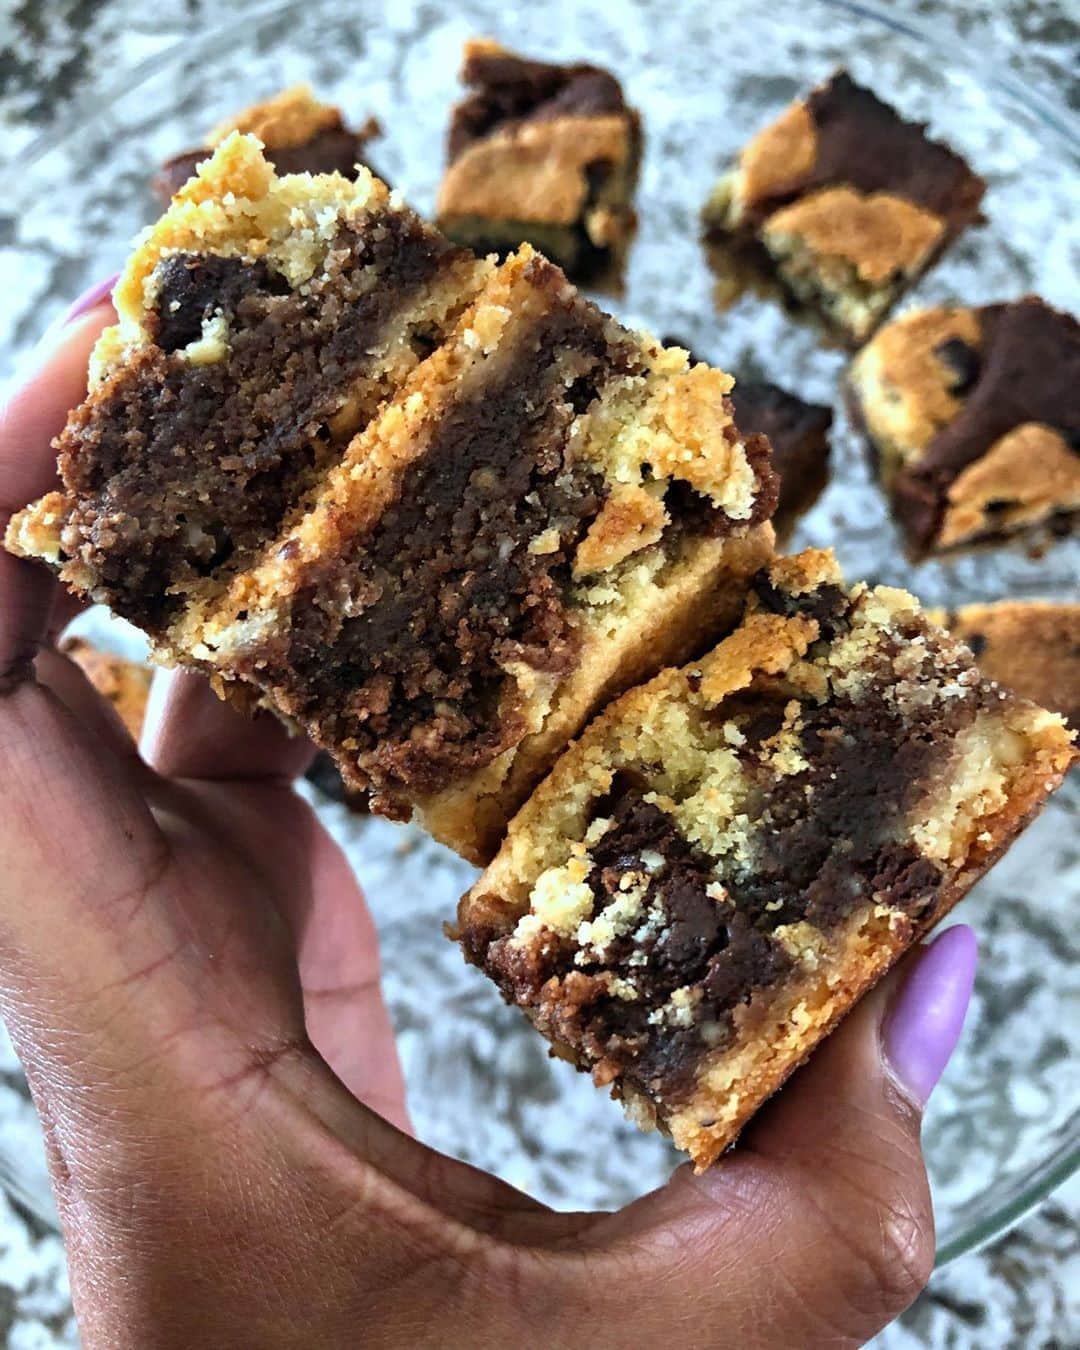 Flavorgod Seasoningsさんのインスタグラム写真 - (Flavorgod SeasoningsInstagram)「🍪🍩🍪 BROOKIES! Recipe👇🏽 If a brownie and a cookie had a baby this would be it! . Made with #FlavorGod Chocolate Donut Topper by customer: @ketodashapril - KETO friendly flavors available here ⬇️ Click link in the bio -> @flavorgod www.flavorgod.com - "I was finally able to try @letsbakebelieve white/dark chocolate chips and they are so good! Unfortunately, the white chocolate chips melted into the brownie while baking in the oven. (I’ve been seeing a lot of comments saying to only top them off at a low temp.. I’ll try that next time 🙃)" . "Also, instead of cocoa powder I used @flavorgod’s chocolate donut and it definitely topped it off!" . Got a sweet tooth? Make this! . INGREDIENTS - Cookie Layer: 1 1/3 cups almond flour 1/3 cup erythritol (or sweetener of choice) 1/2 teaspoon baking soda 1/4 teaspoon salt 1/4 cup butter, softened 1 egg 1/2 teaspoon vanilla 1/3 cup @letsbakebelieve dark chocolate chips . Brownie Layer: 2/3 cup almond flour 1/2 cup erythritol 1/4 cup cocoa powder (I used @flavorgodseasoning using chocolate donut 🍩🤤) 1/2 teaspoon baking powder 1/4 teaspoon salt 3 tablespoons butter, softened 1 egg 3 tablespoons @letsbakebelieve white chocolate chips - DIRECTIONS - 1. Preheat oven to 350 F. 2. Grease or line an 8×8 square pan with parchment paper. 3. Start with cookie layer: combine dry ingredients in a large bowl. Add butter and stir until distributed. Add egg and vanilla and stir until combined. Fold in chocolate chips. 4. Spoon about 2/3 of the cookie dough into the bottom of the pan. Use wet fingers to spread dough evenly over bottom of pan. 5. Follow same instructions as cookie layer to assemble brownie ingredients. 6. Spoon brownie batter into the pan, and use either the back of a spoon or wet fingers to spread brownie batter evenly over cookie dough. 7. Take remaining 1/3 of cookie dough and distribute randomly on top of brownie batter. I formed the remaining dough into circle shapes to keep some brownie peeking through. 8. Bake for 30-40 minutes - Flavor God Seasonings are: 🍩ZERO CALORIES PER SERVING🍩 🍩MADE FRESH 🍩MADE LOCALLY IN US 🍩FREE GIFTS AT CHECKOUT 🍩GLUTEN FREE 🍩#PALEO & #KETO FRIENDLY」10月20日 8時01分 - flavorgod